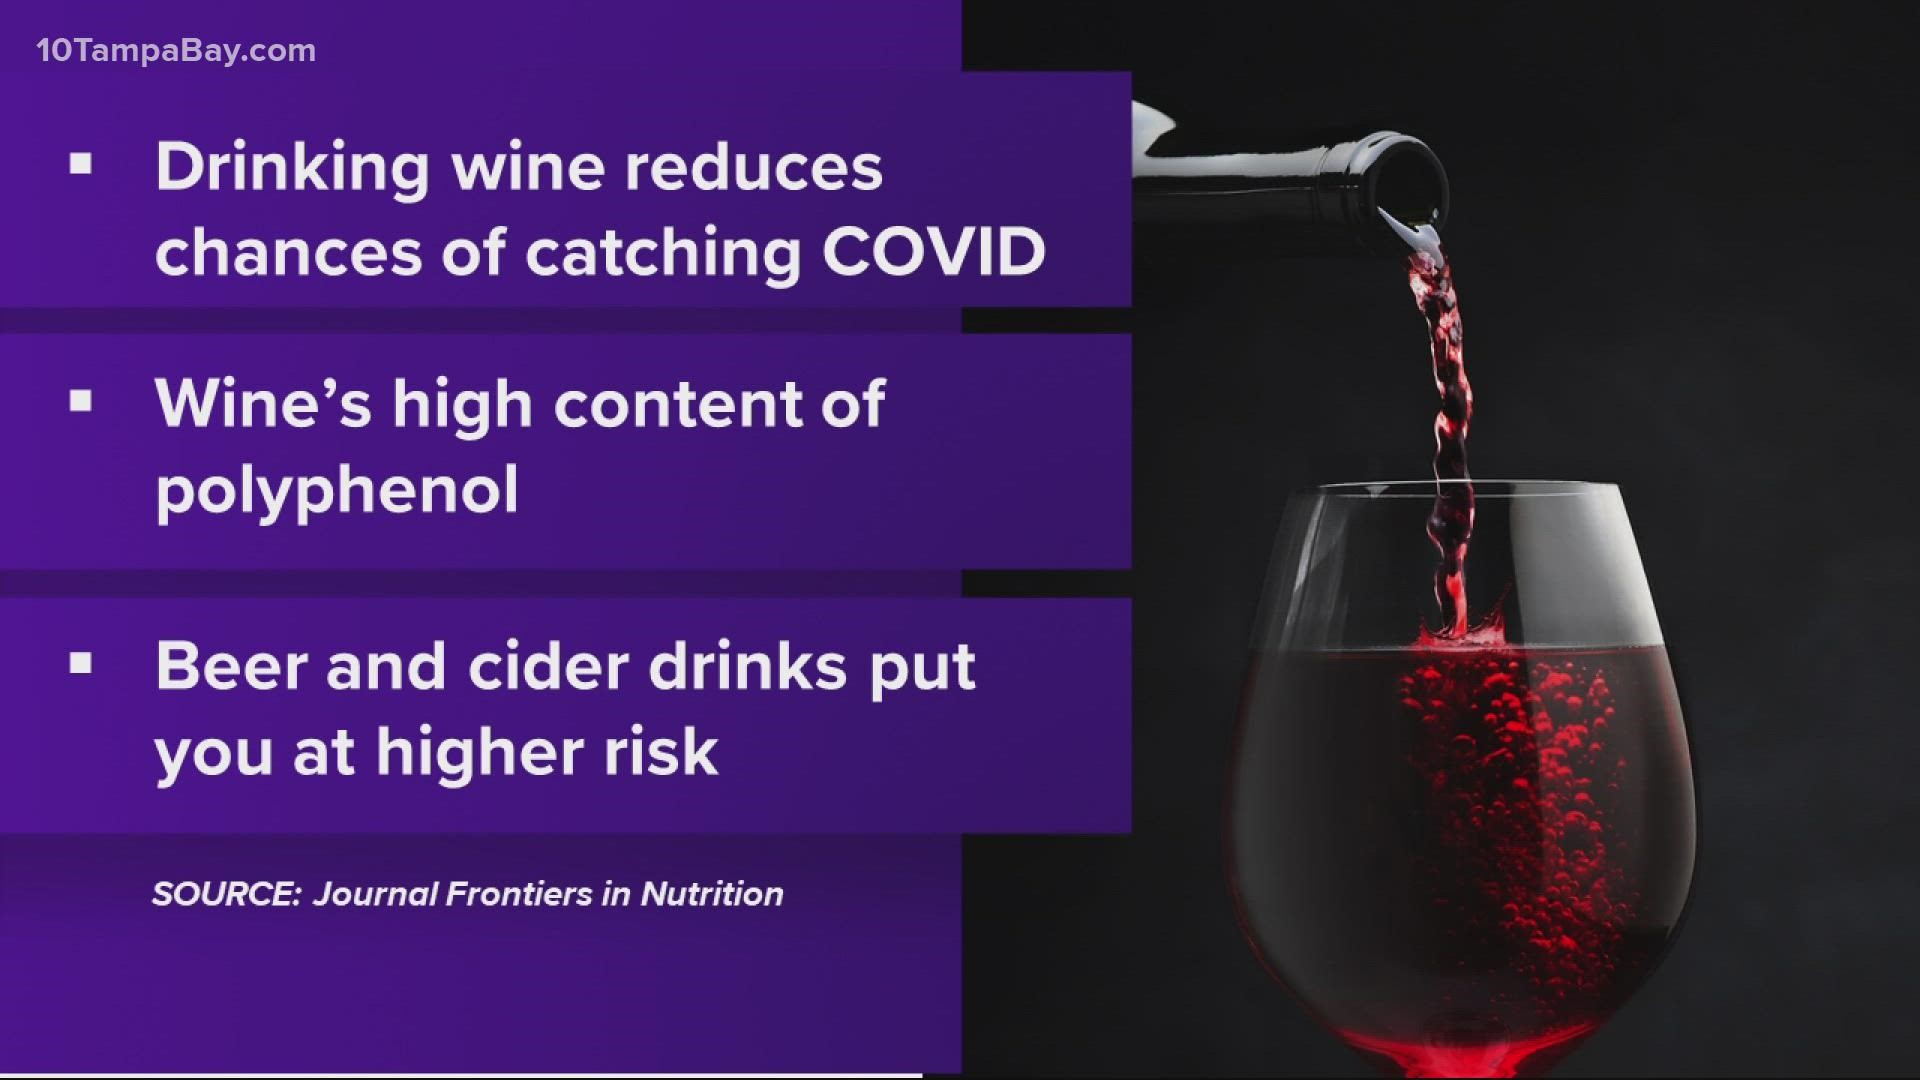 The study found that people who consumed one to two glasses of wine had a protective effect against COVID-19.